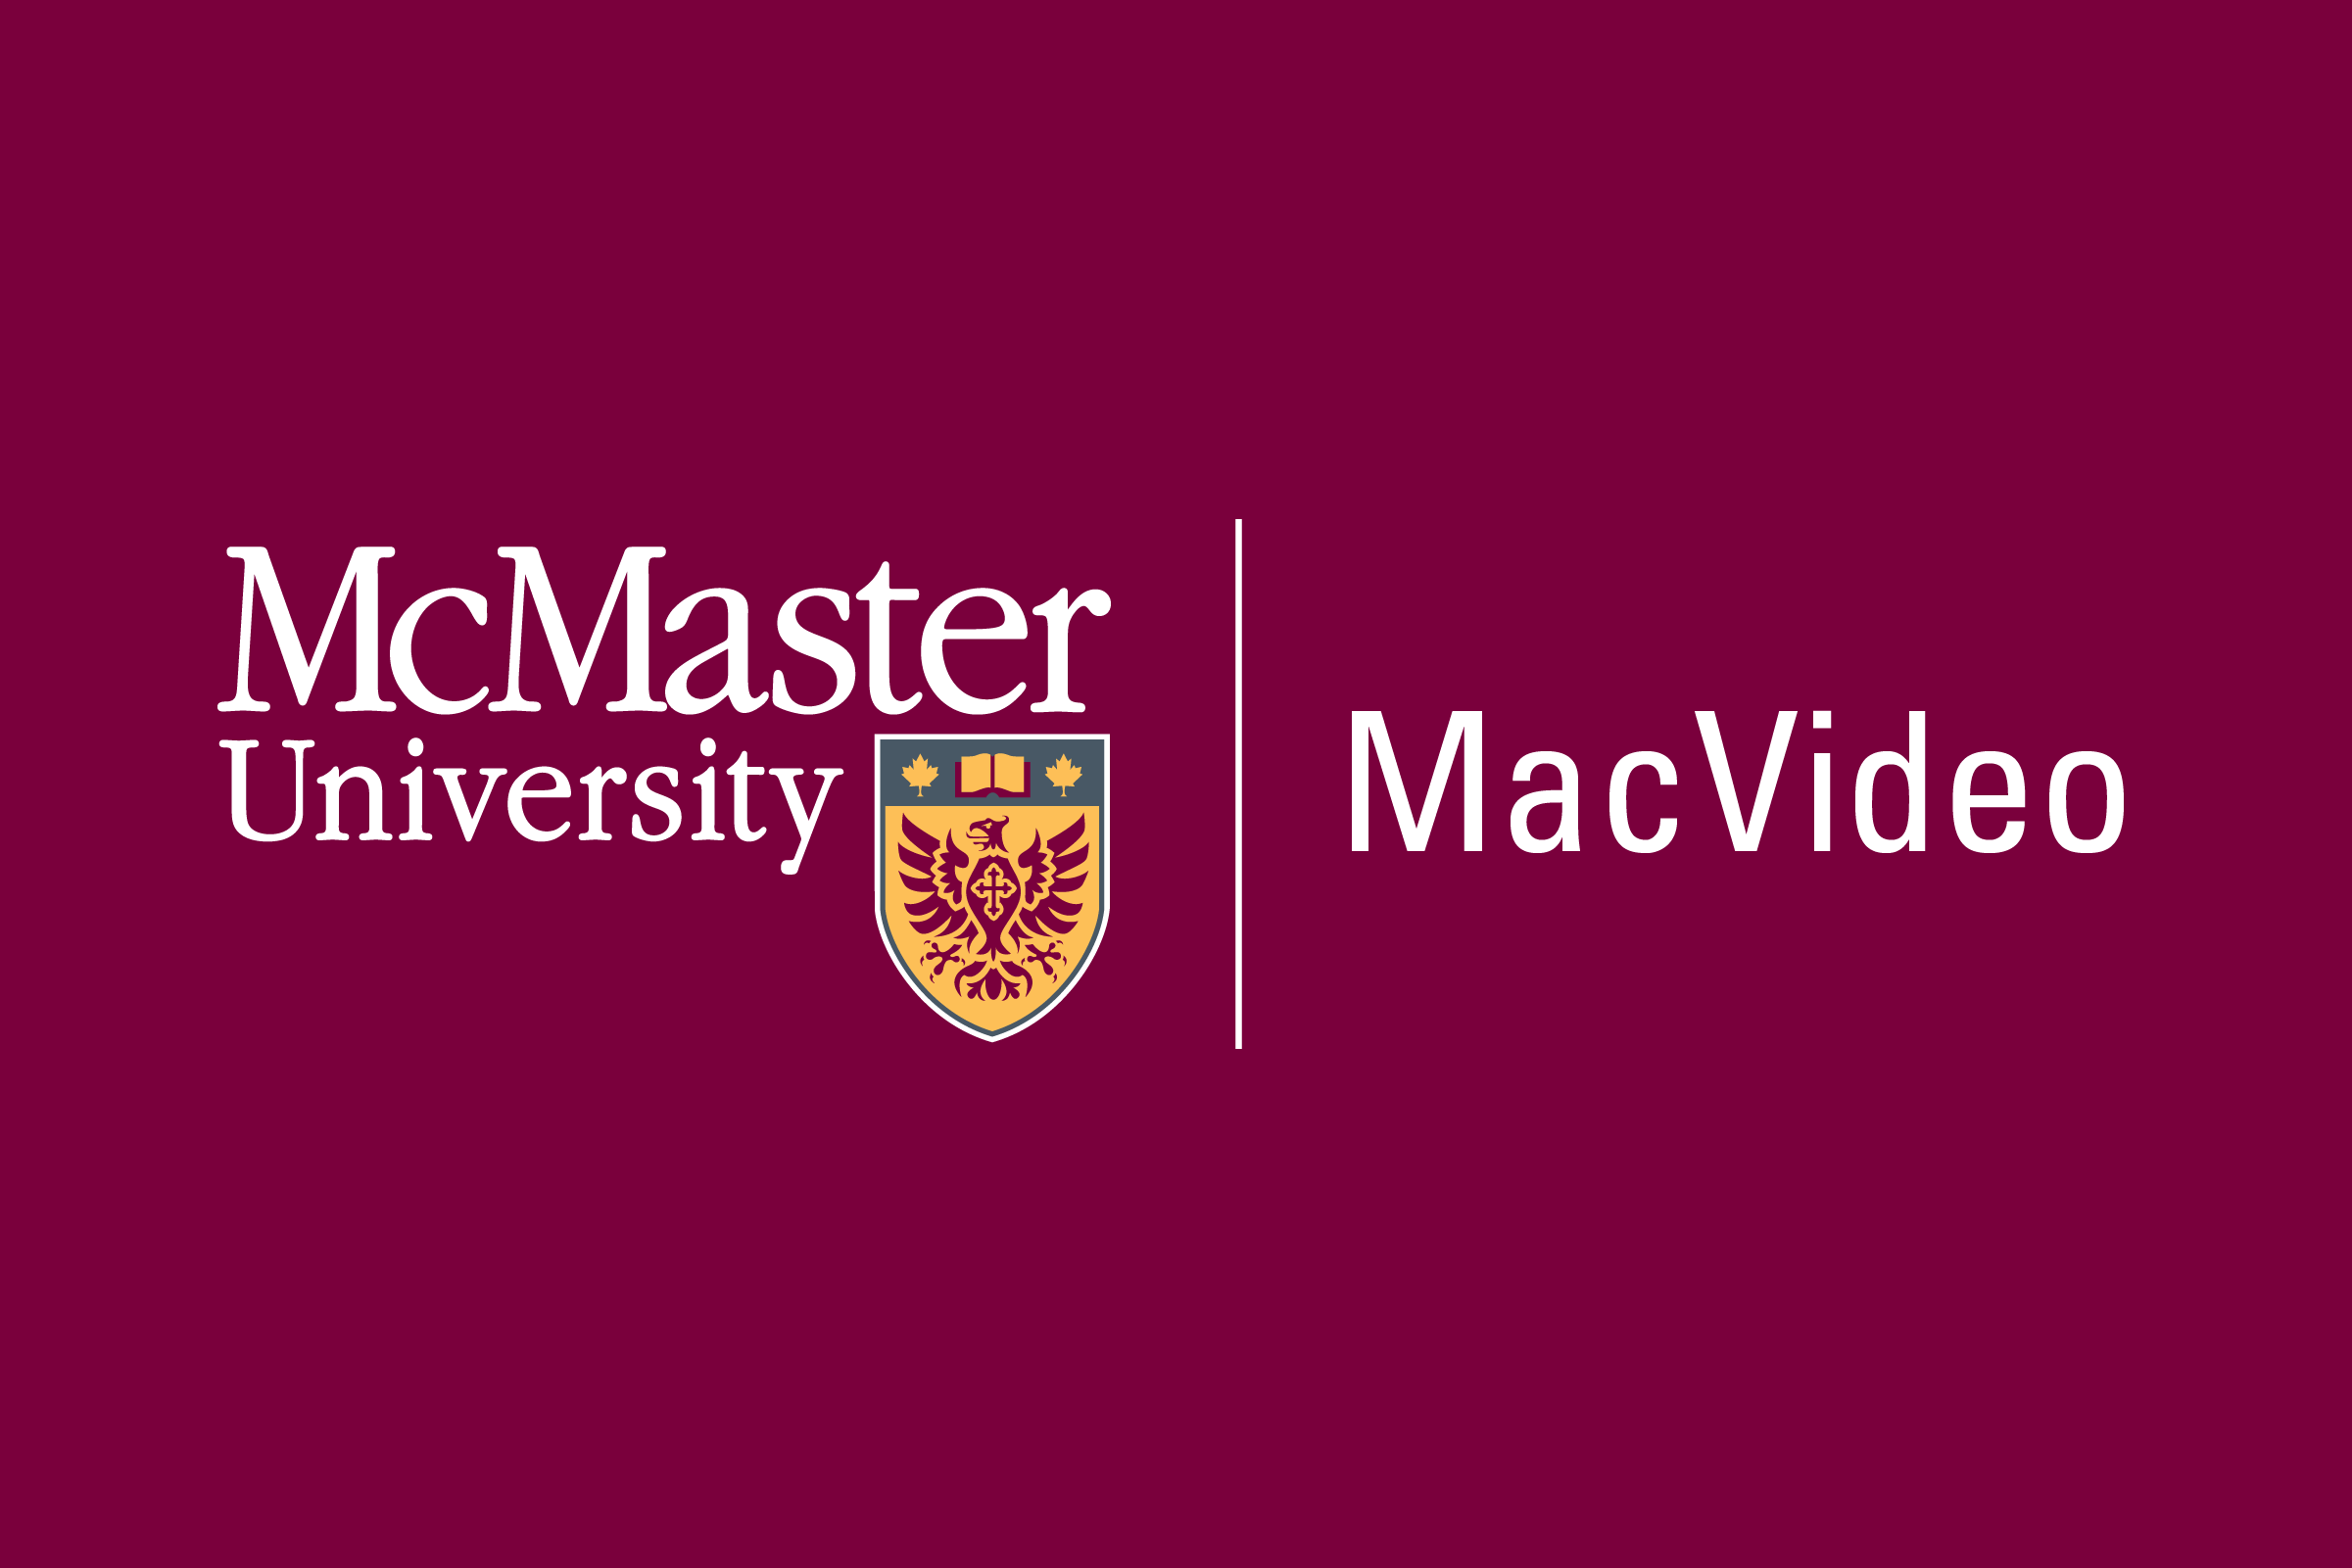 MacVIdeo image